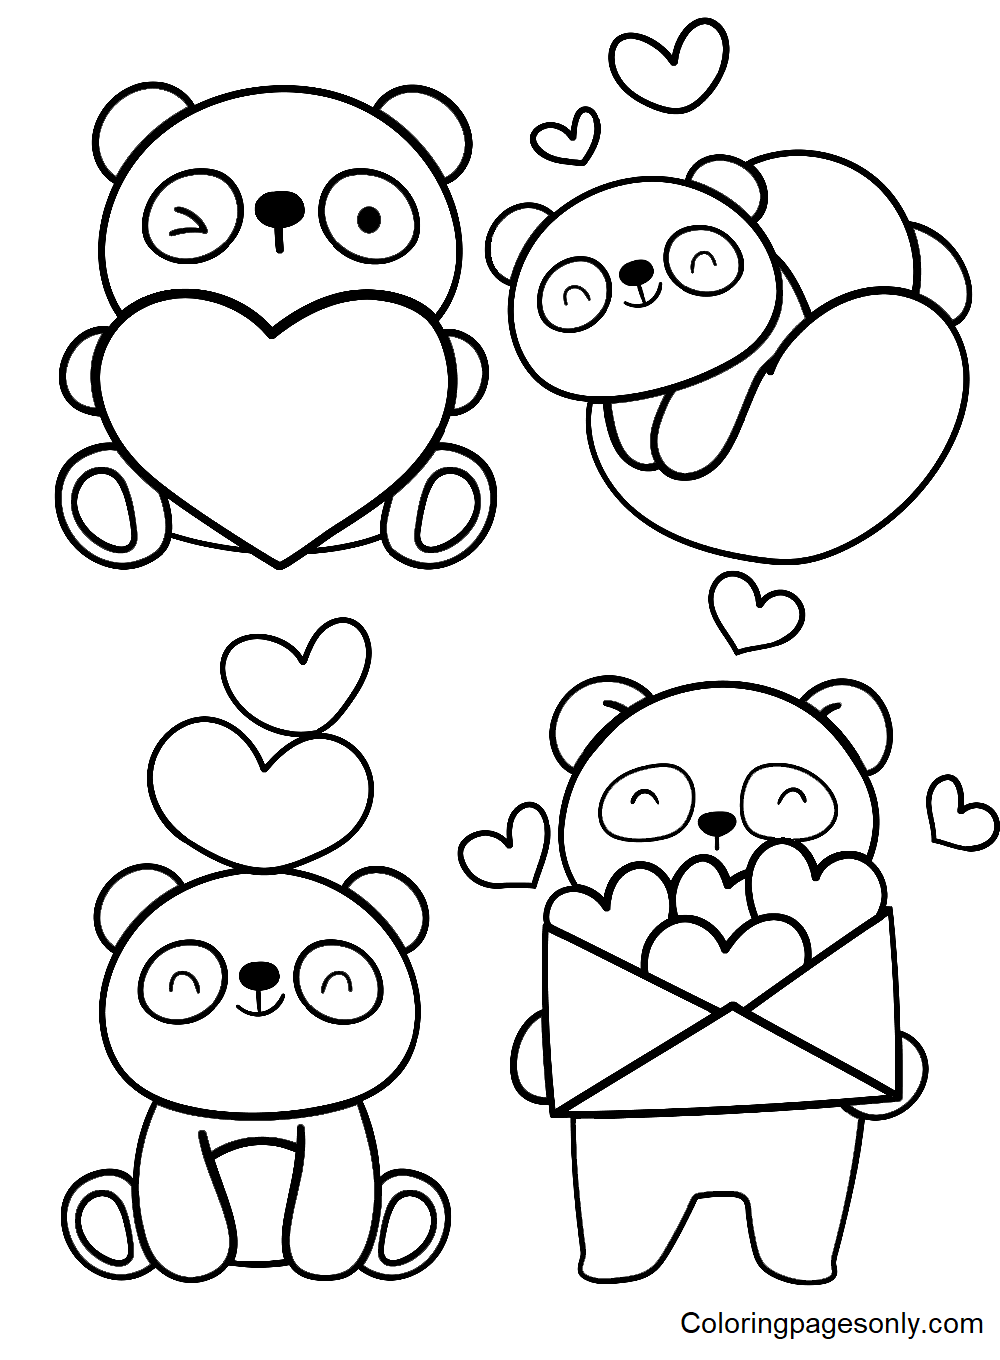 Cute Panda Stickers Coloring Pages